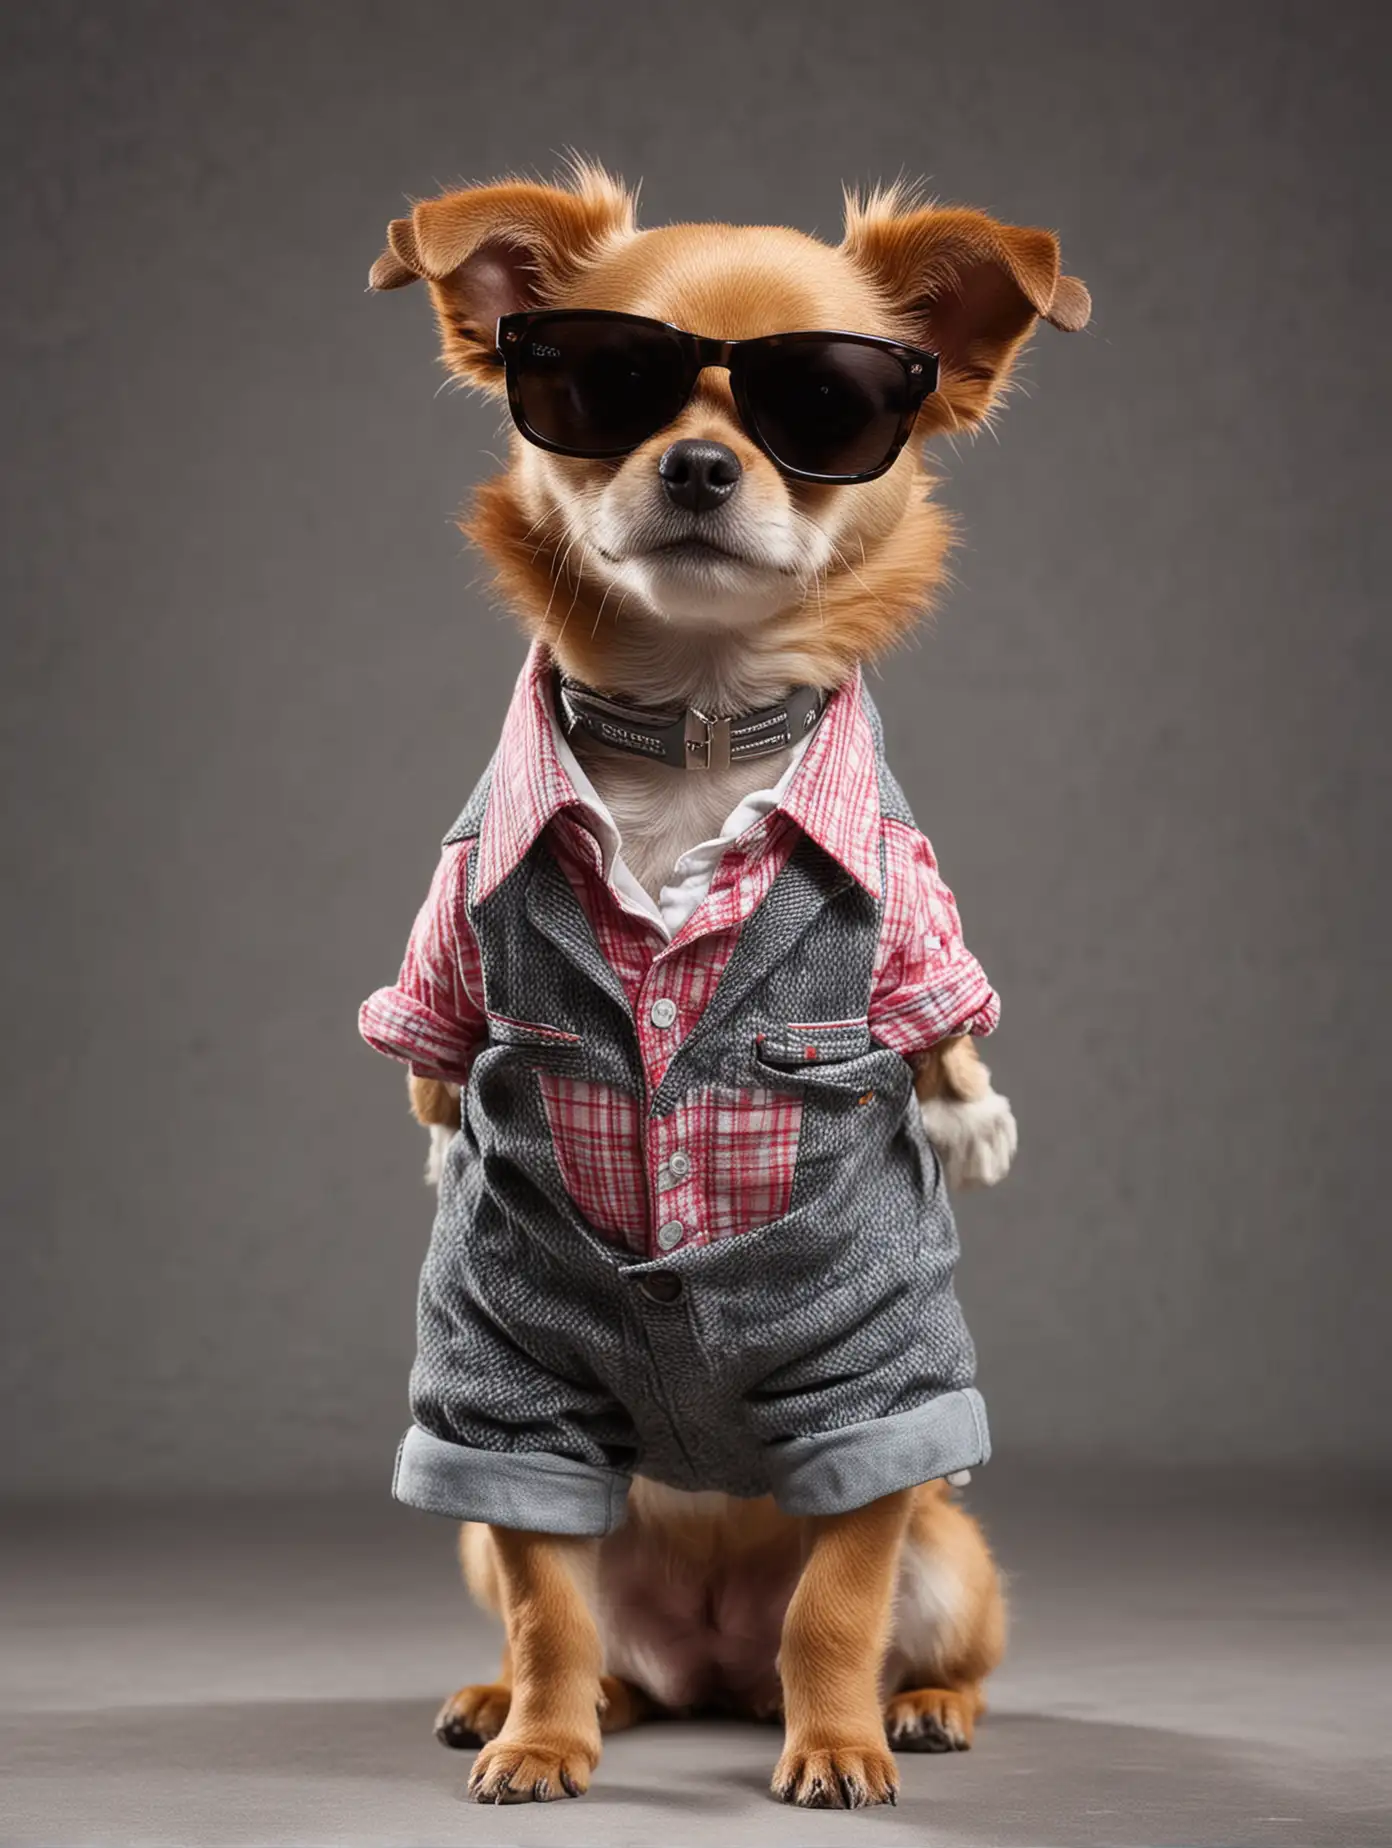 a stylish little dog, wearing fashionable clothes, wearing sunglasses, standing on a T stage showing off